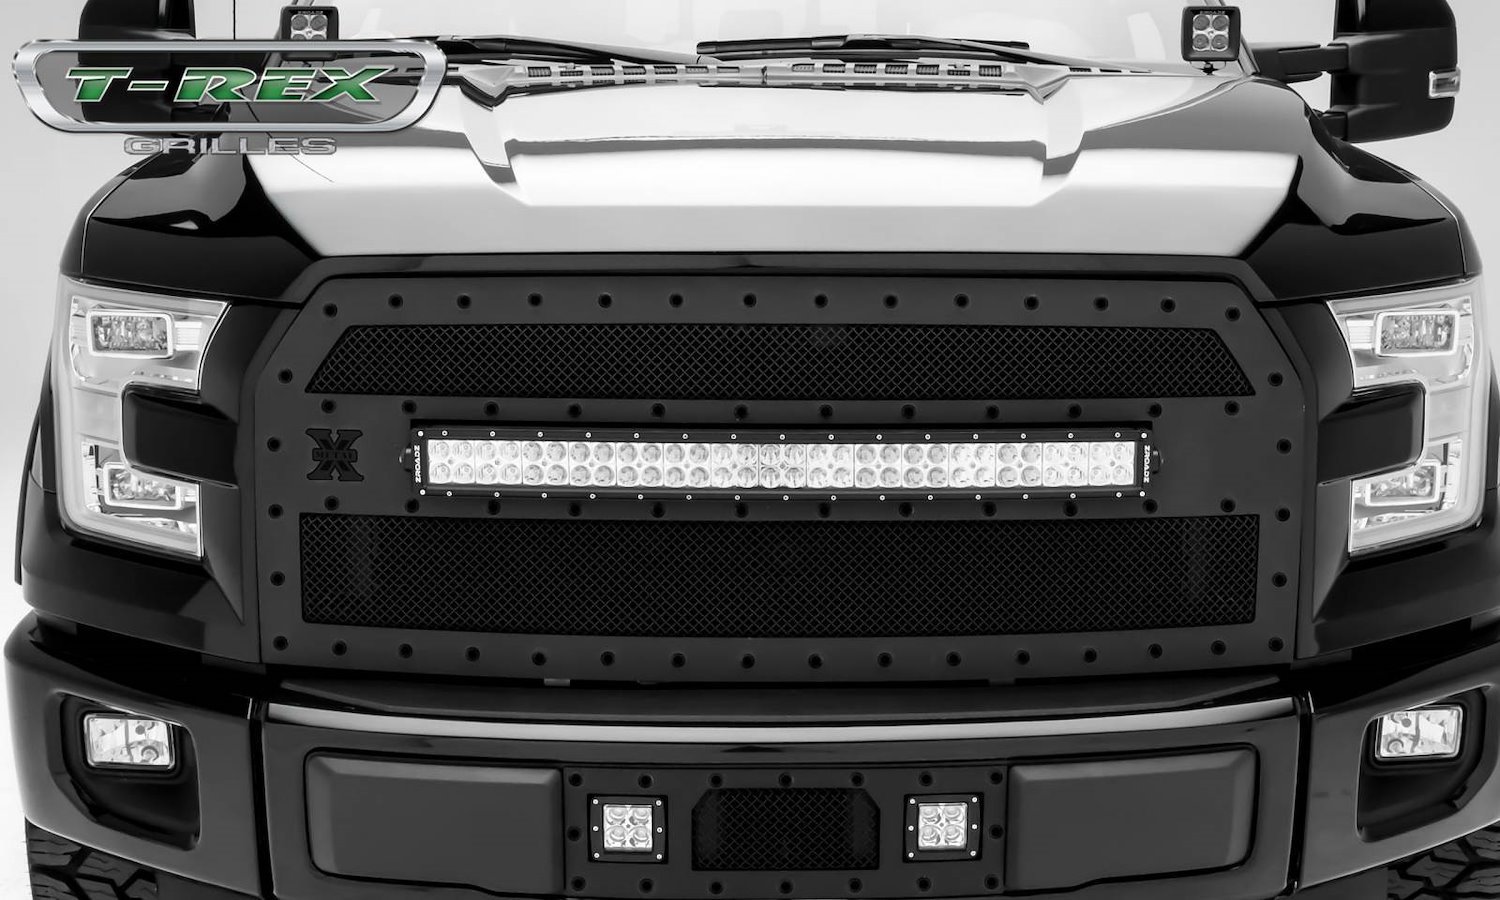 Ford F150 Torch Series LED Ligfht Main Grille 1- 30 Light Bar Black Powder Coated w/Center Bar w/Blk